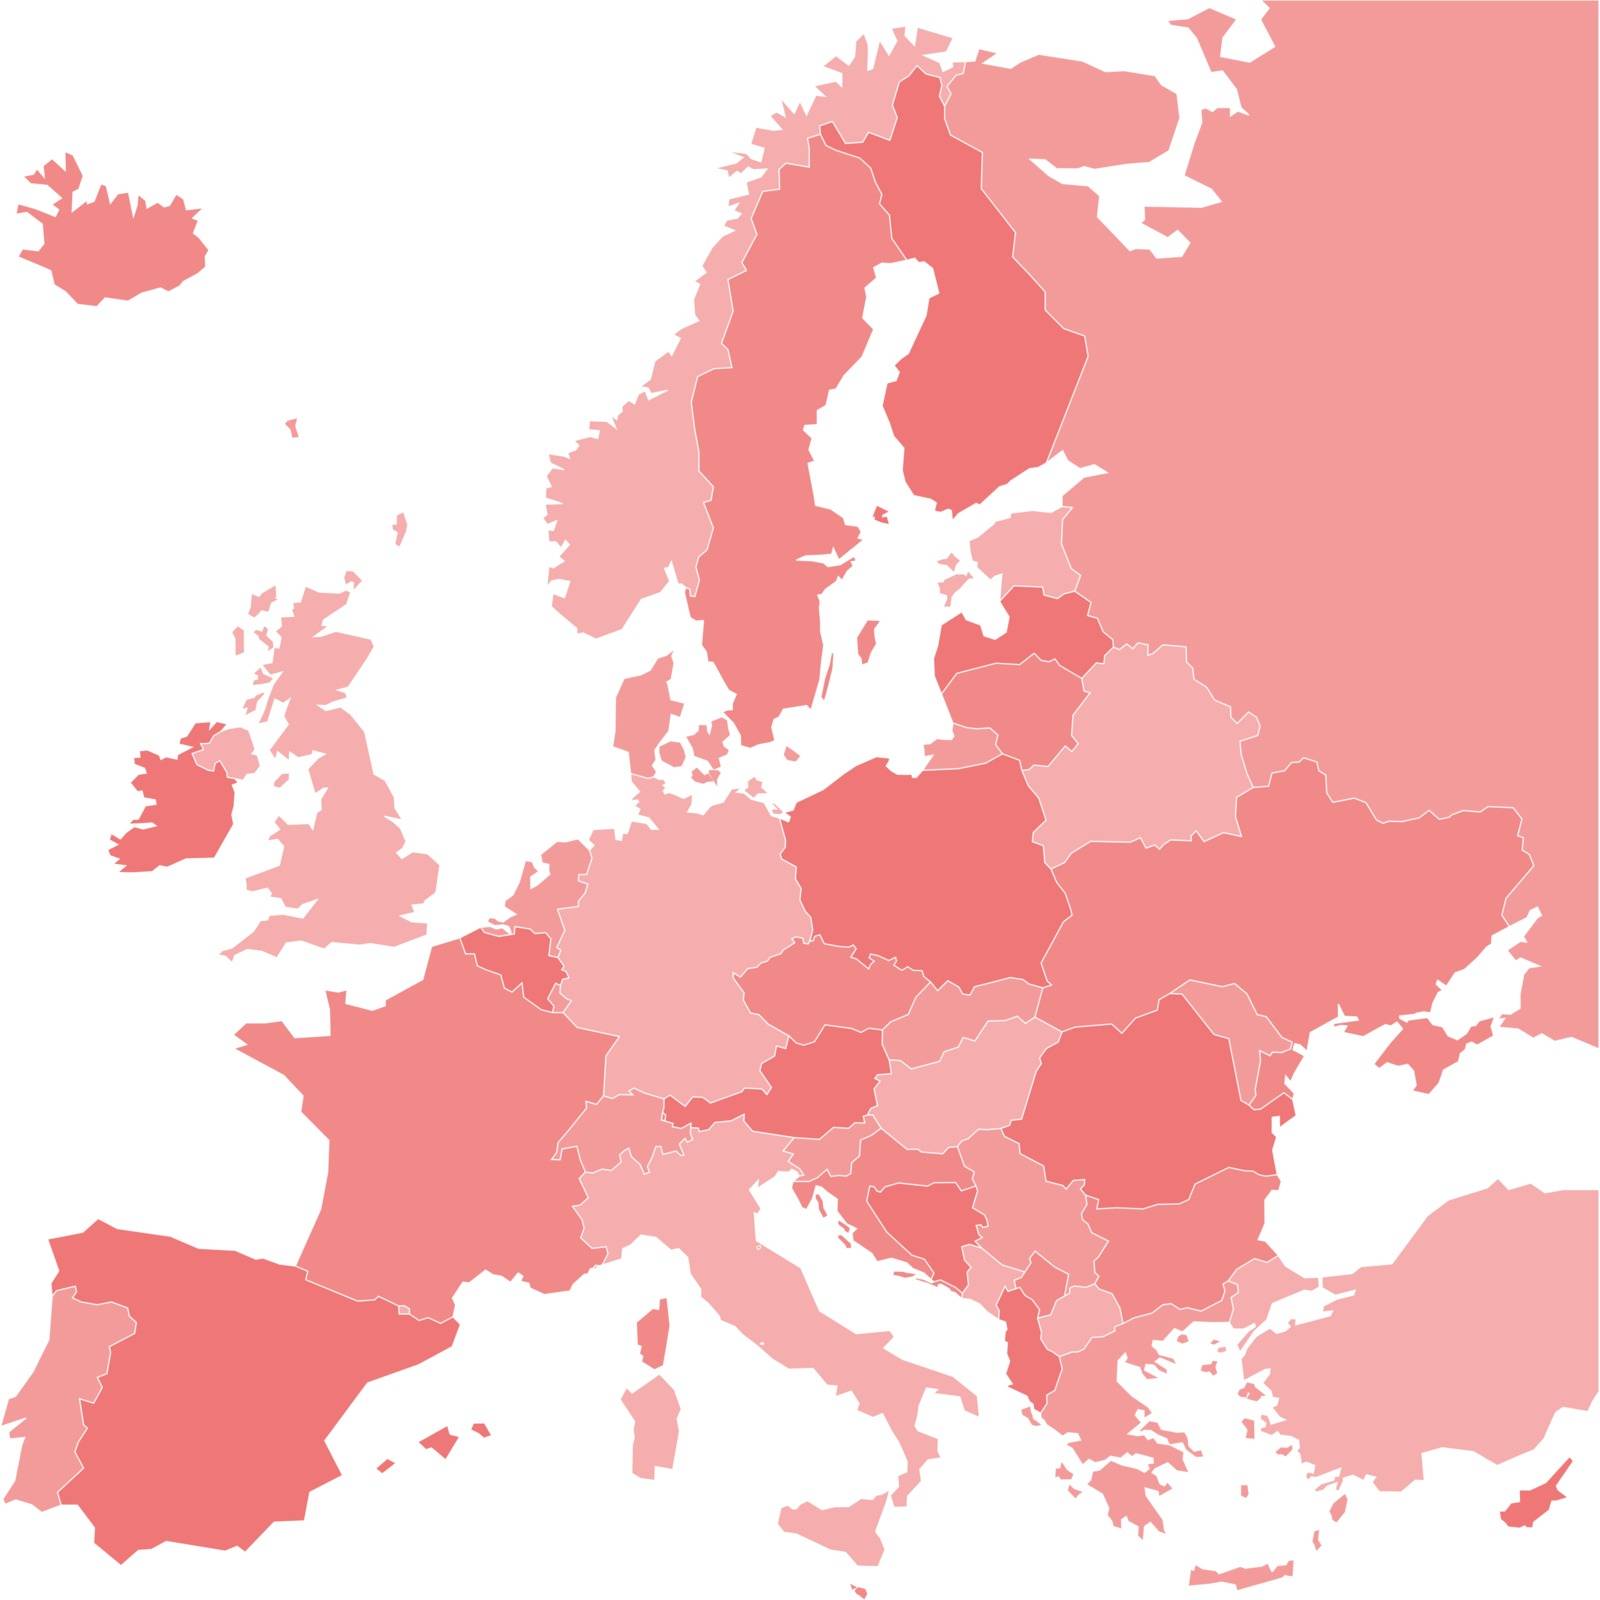 Blank map of Europe. Vector illustration in red shades on white background.